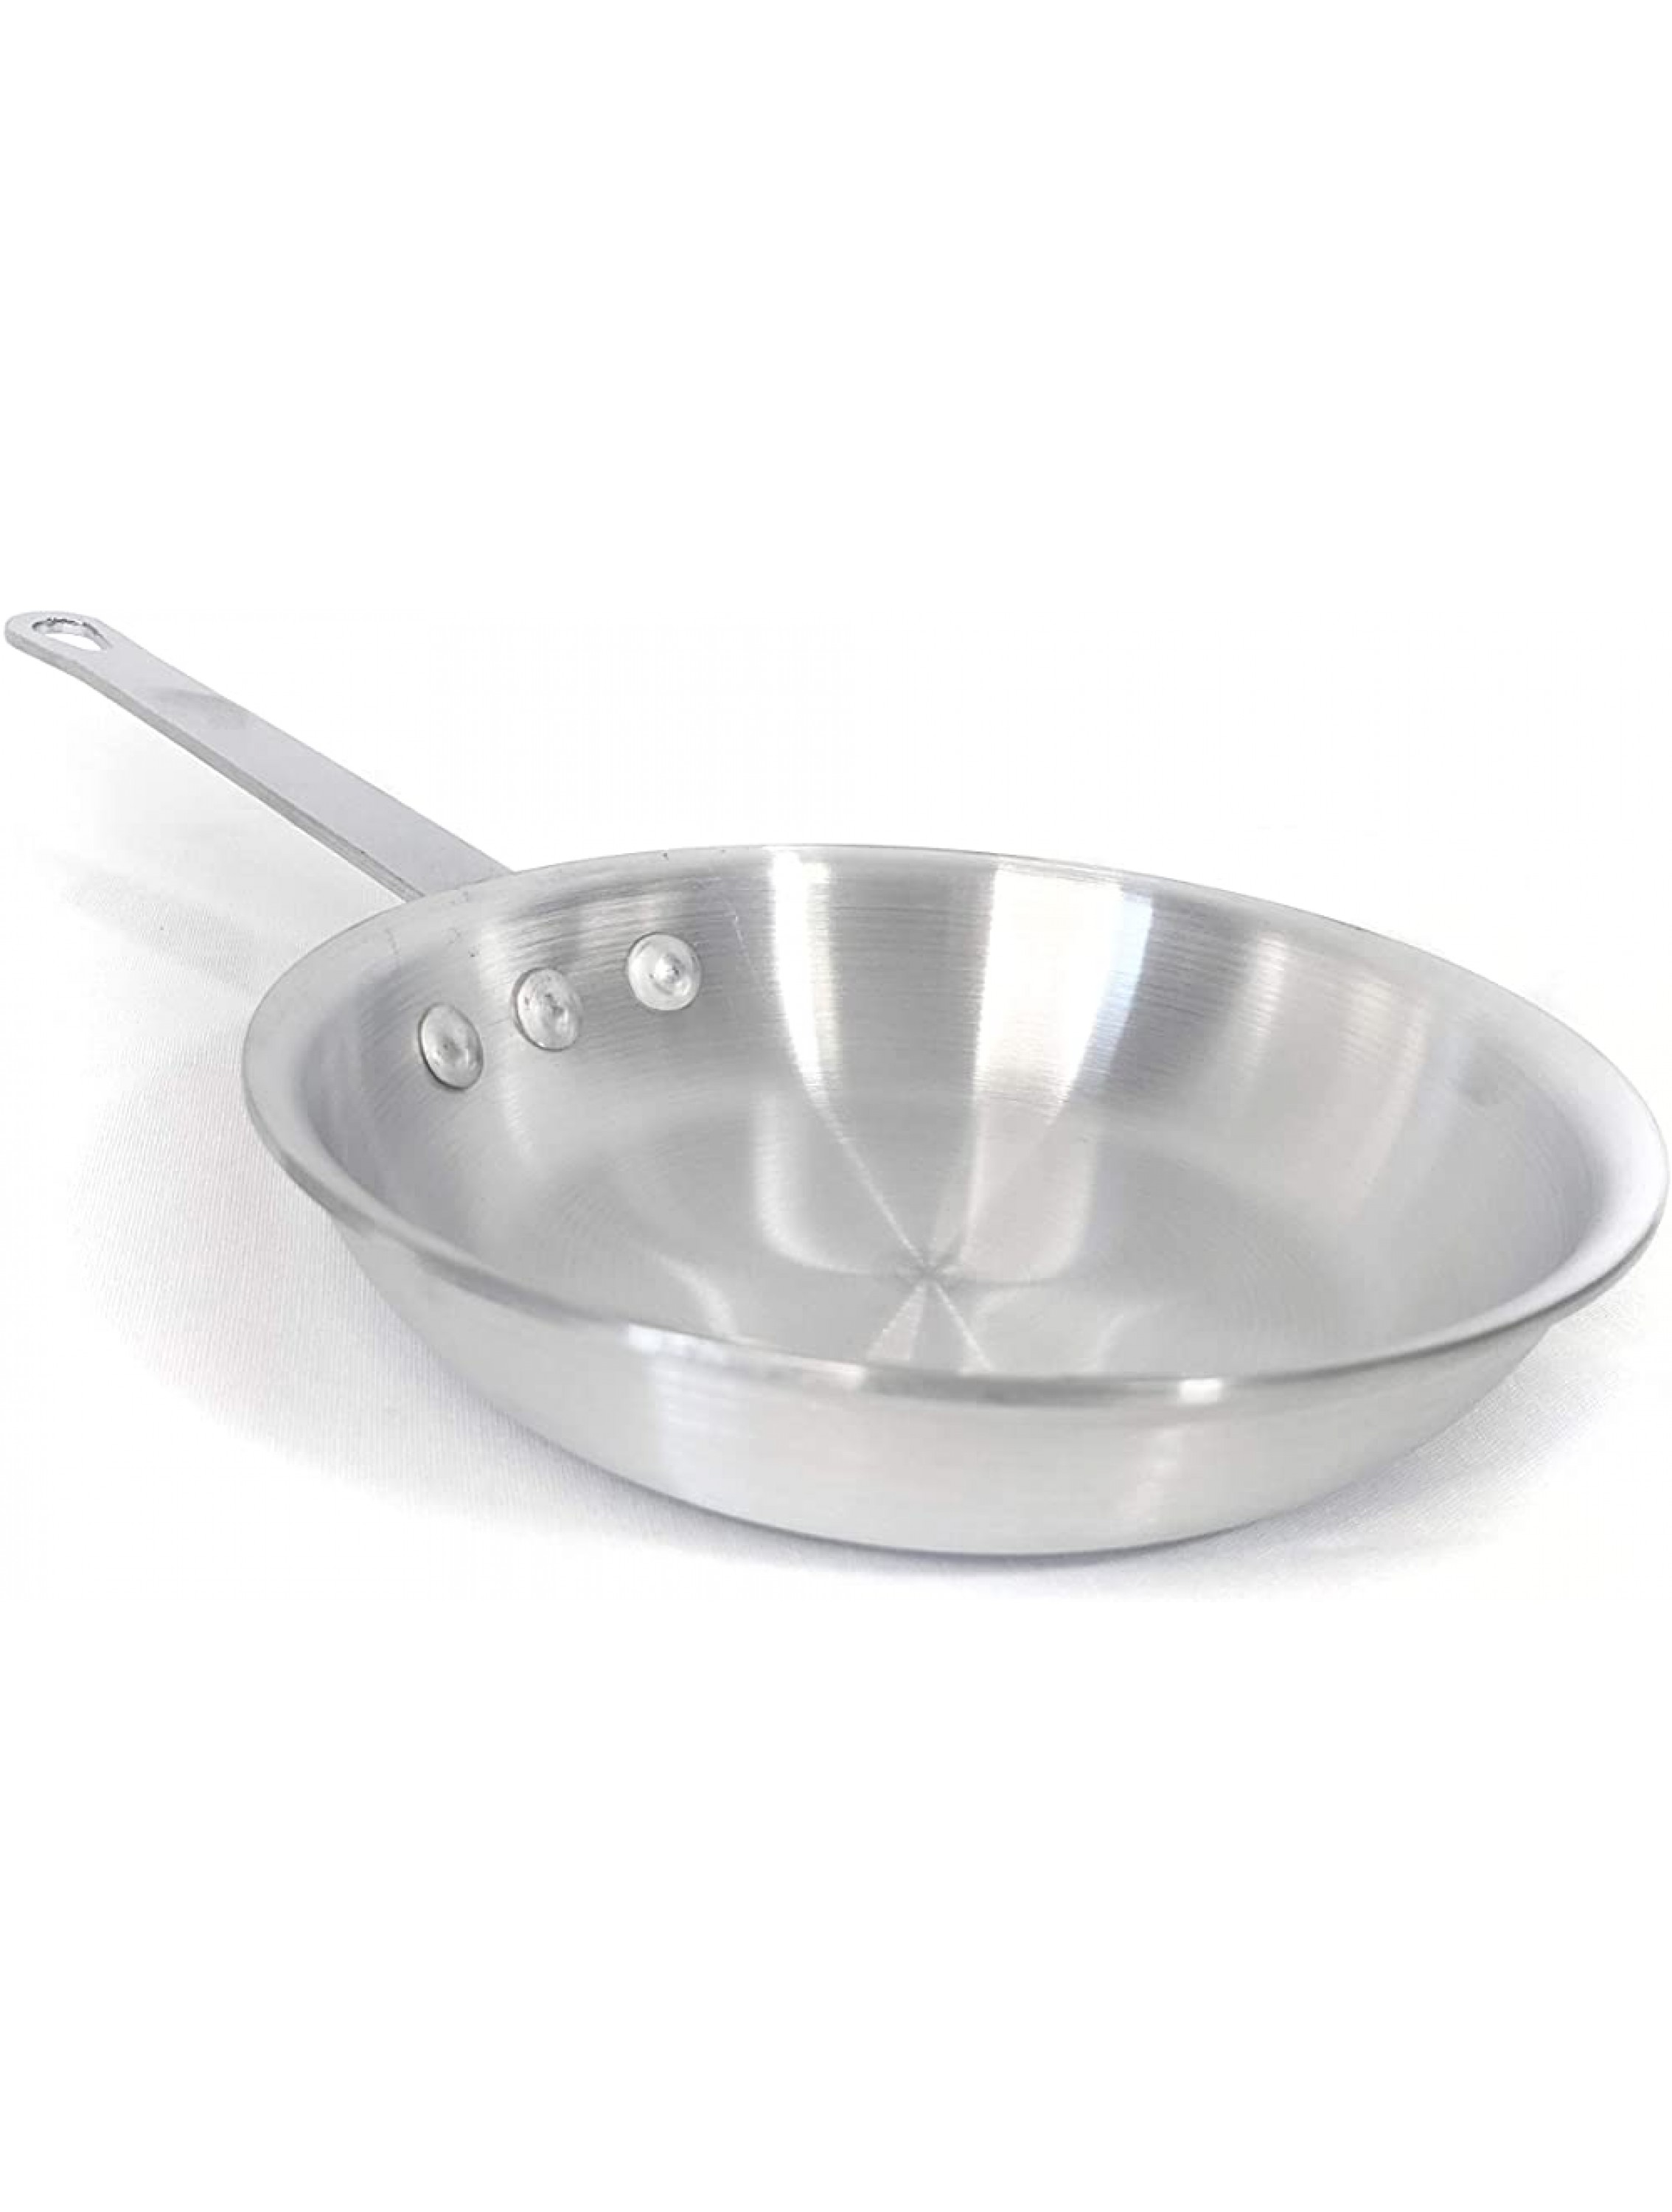 10 Inch Natural Finish Aluminum Frying Pan Fry Pan Commercial Grade NSF Certified - BNH7Y8UQP